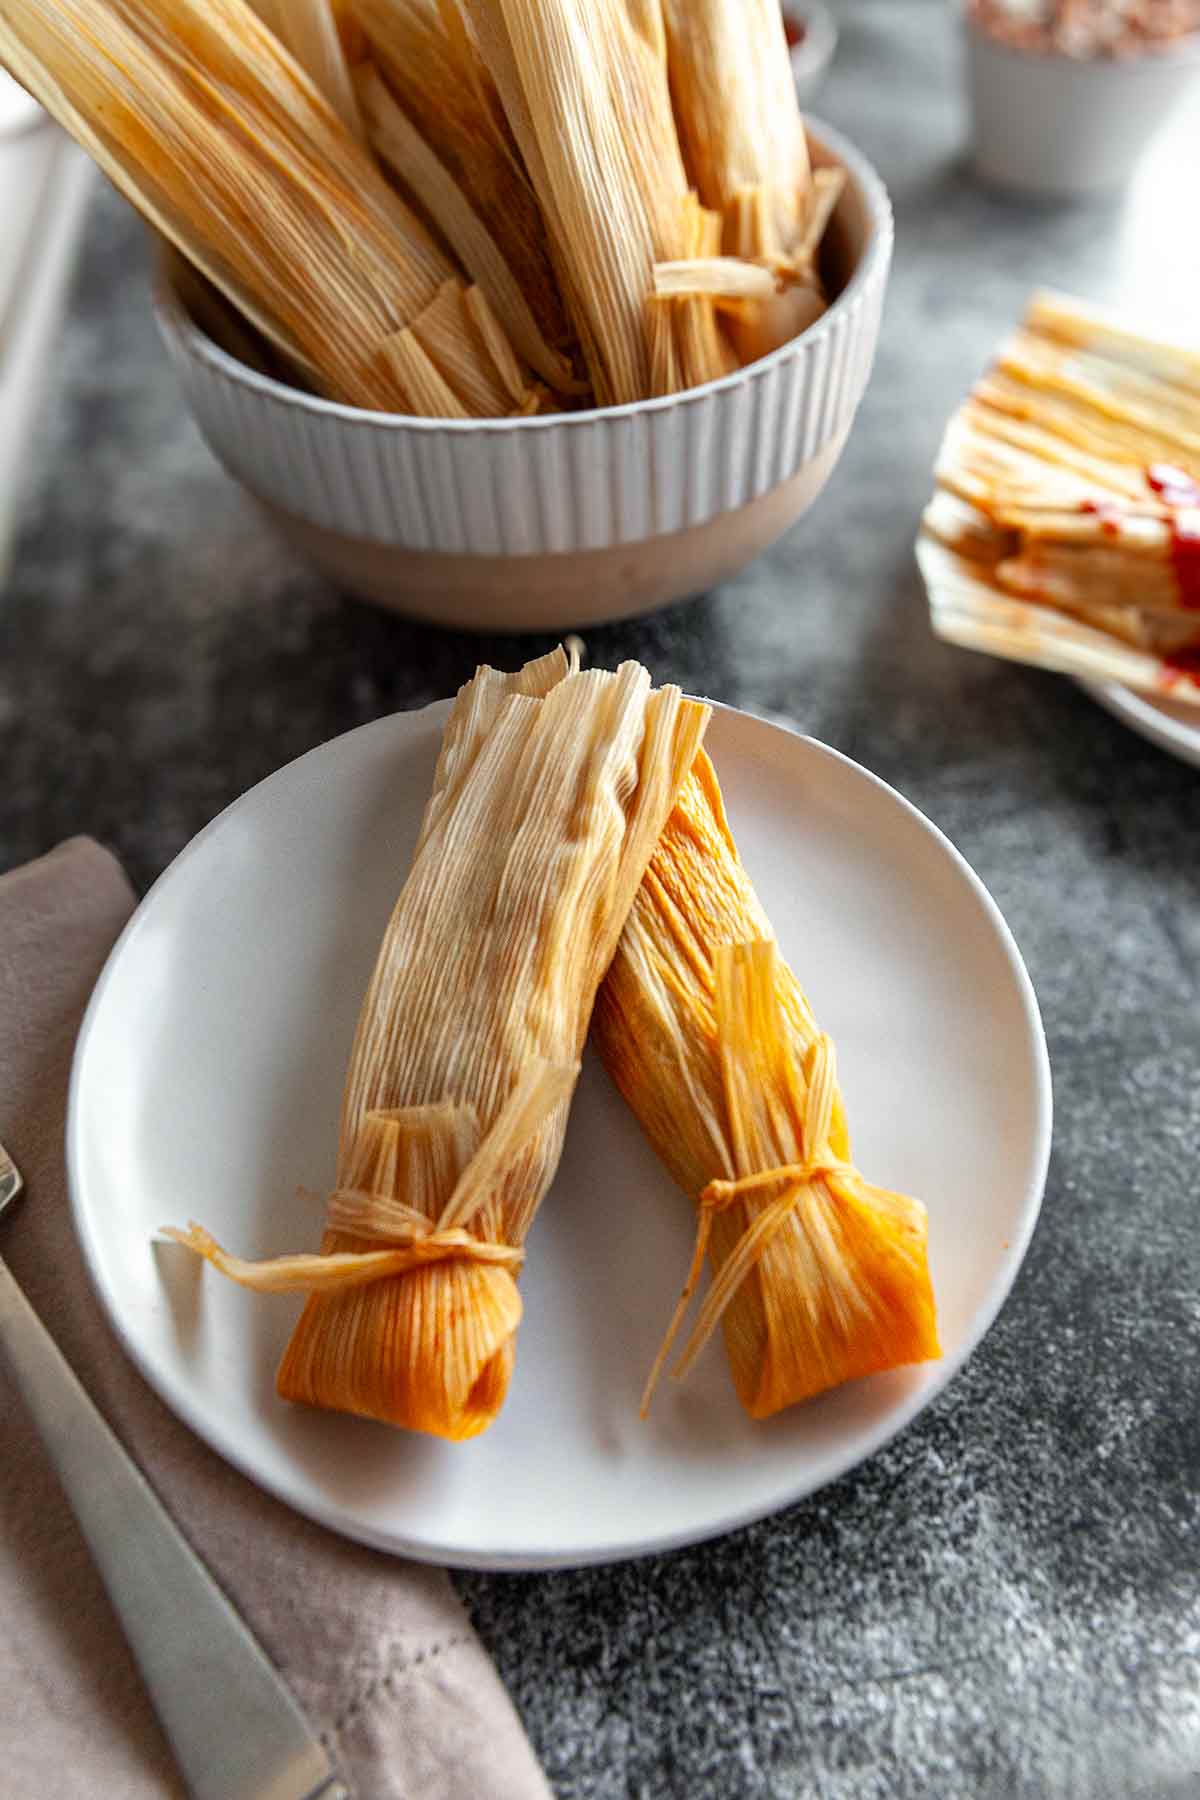 Two tamales on a white plate with a bowl of tamales in the background.